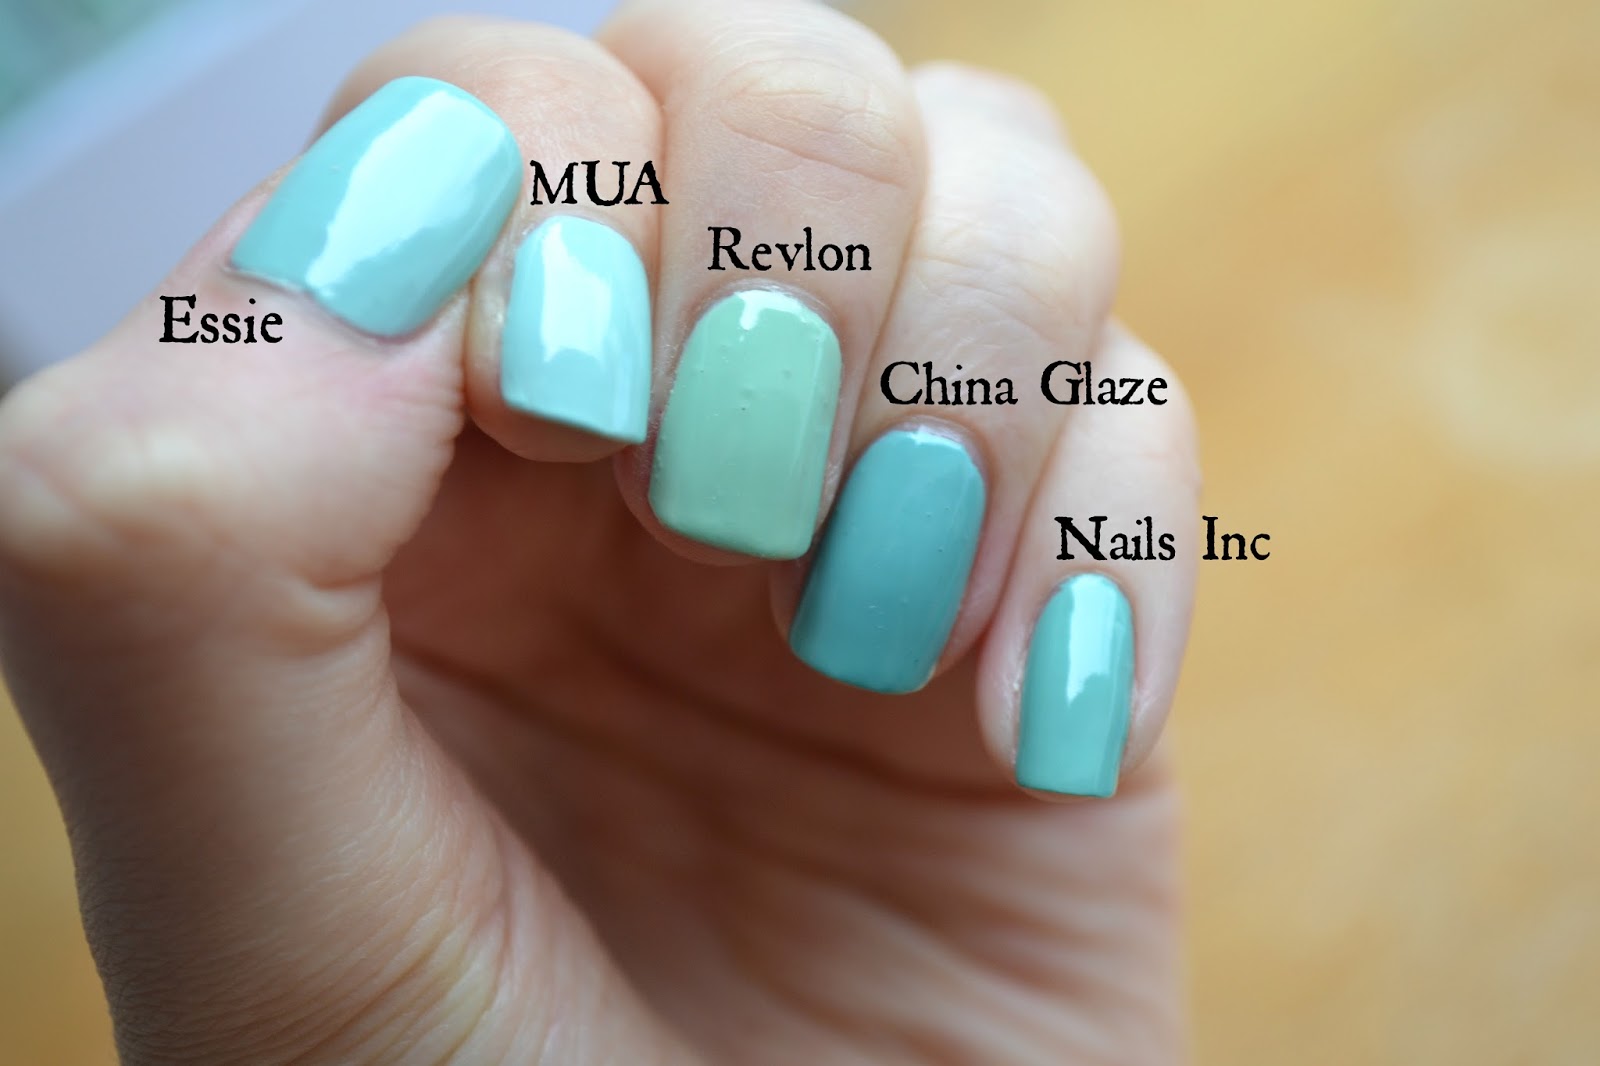 3. Affordable Mint Nail Polish in India - wide 9